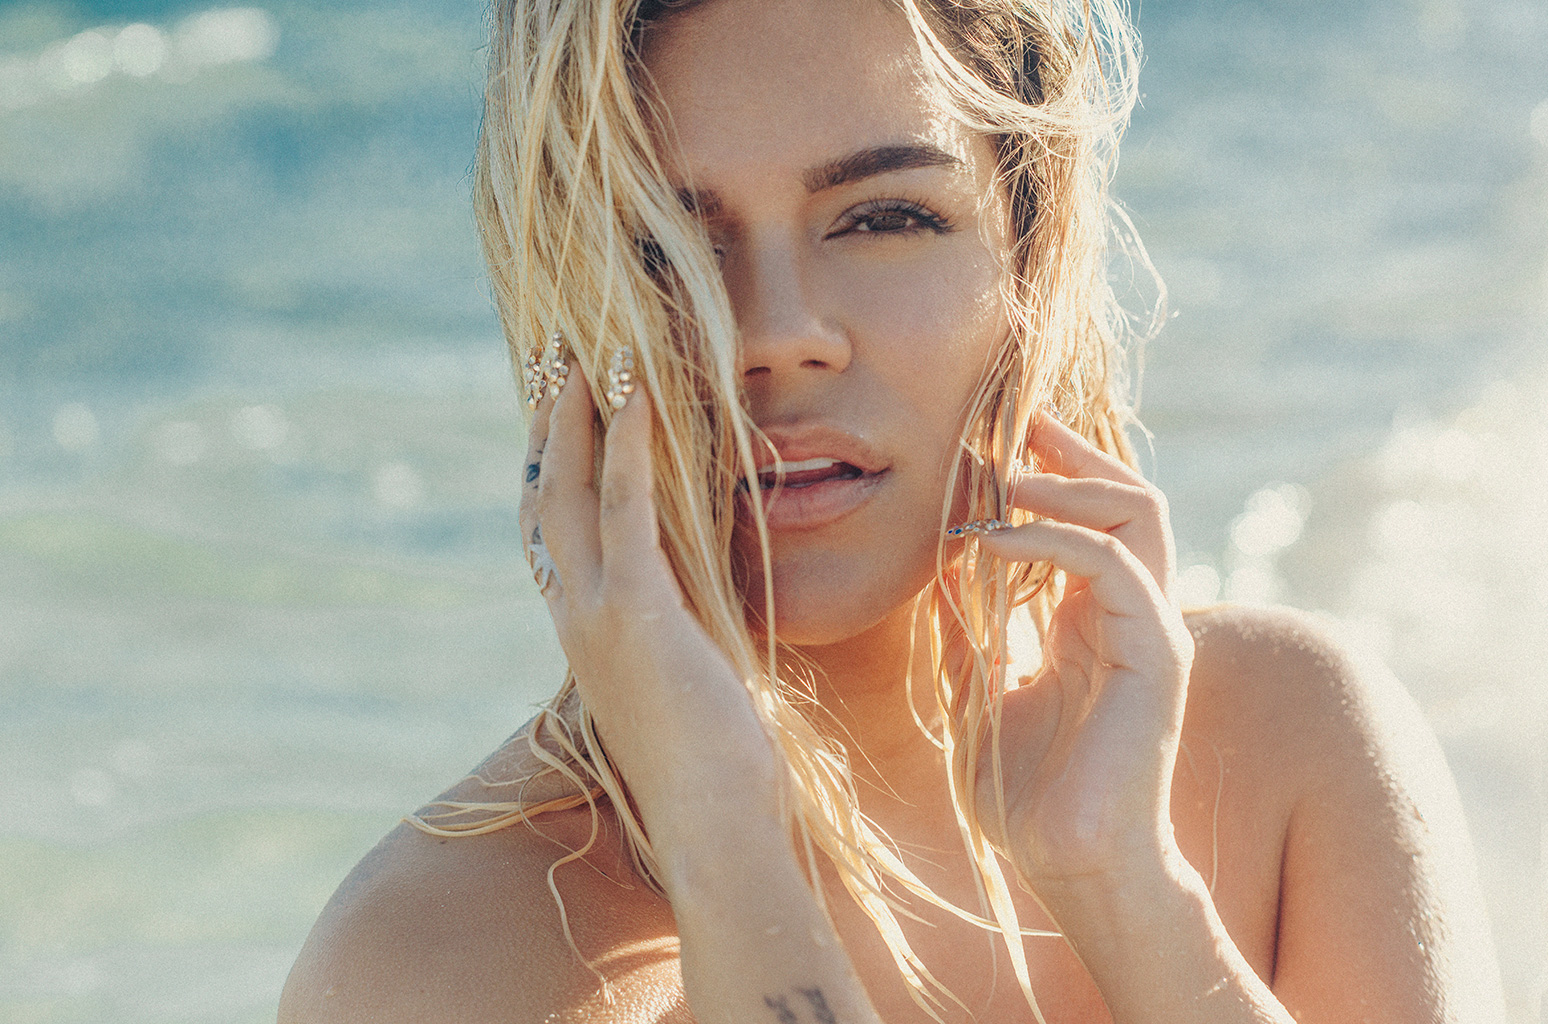 Karol G to Make Her Late-Night Performance Debut - www.billboard.com - Colombia